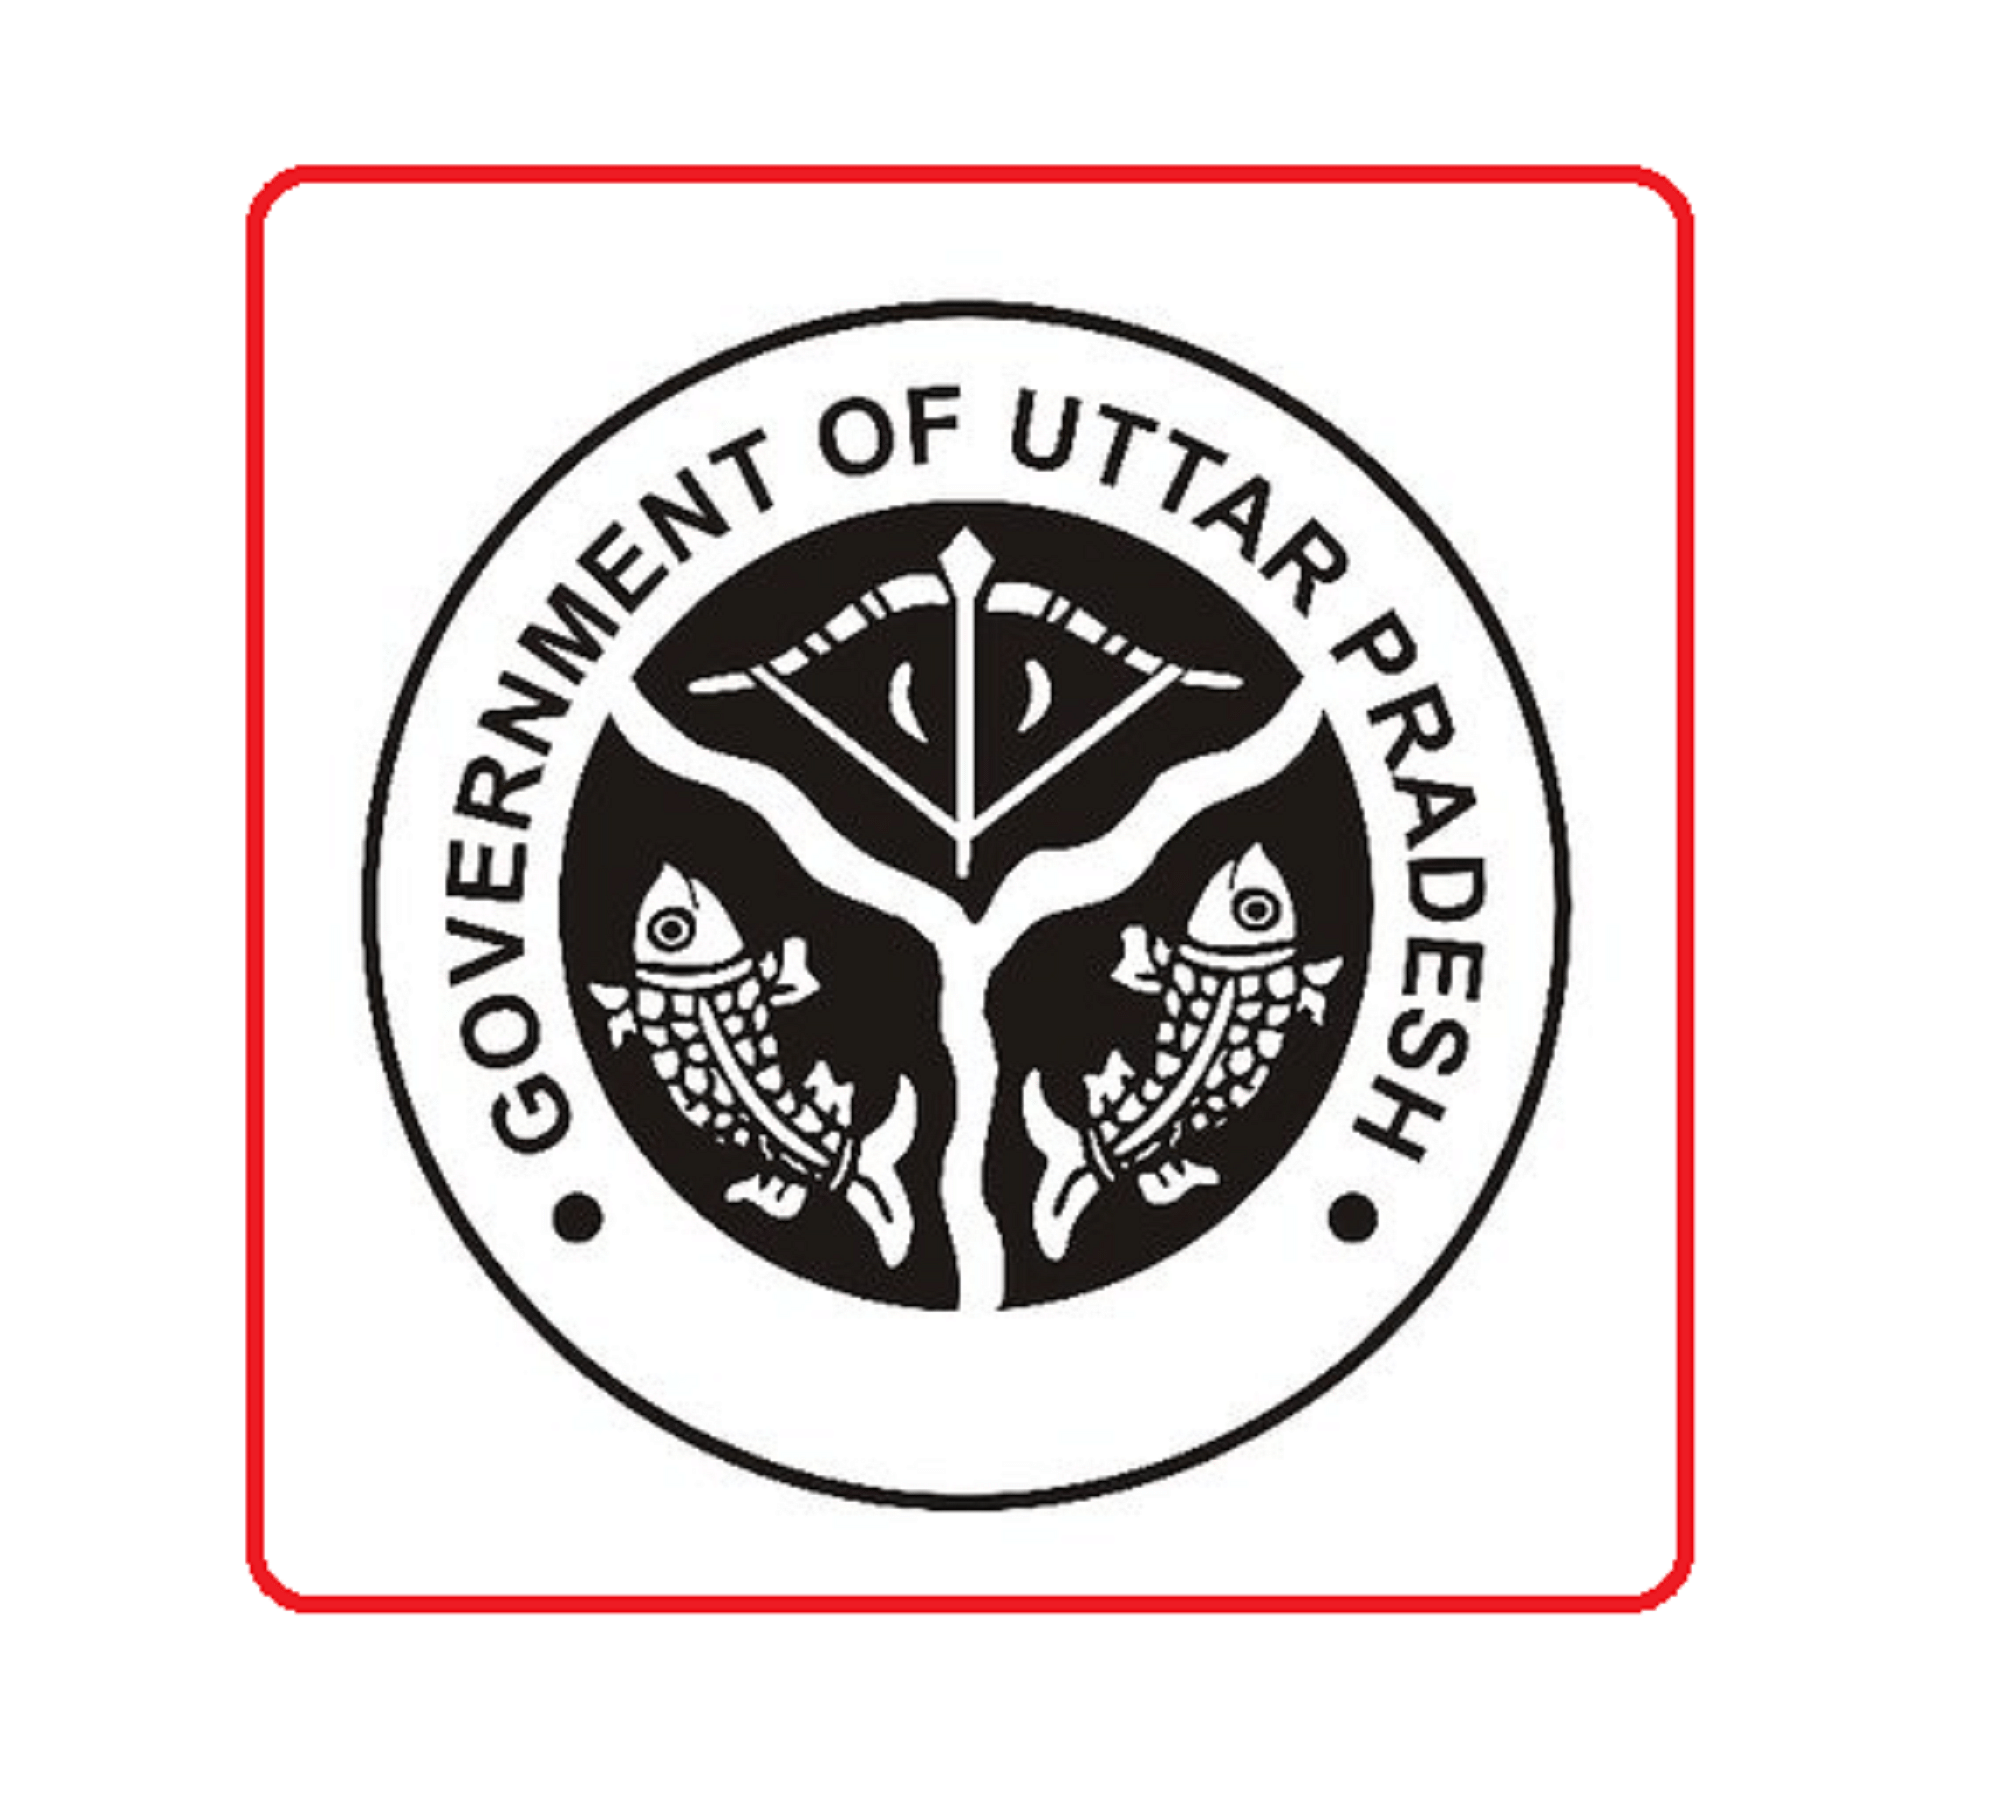 UP Board Exam 2020: Final Date Sheet & Exam Centres Released, Check Here